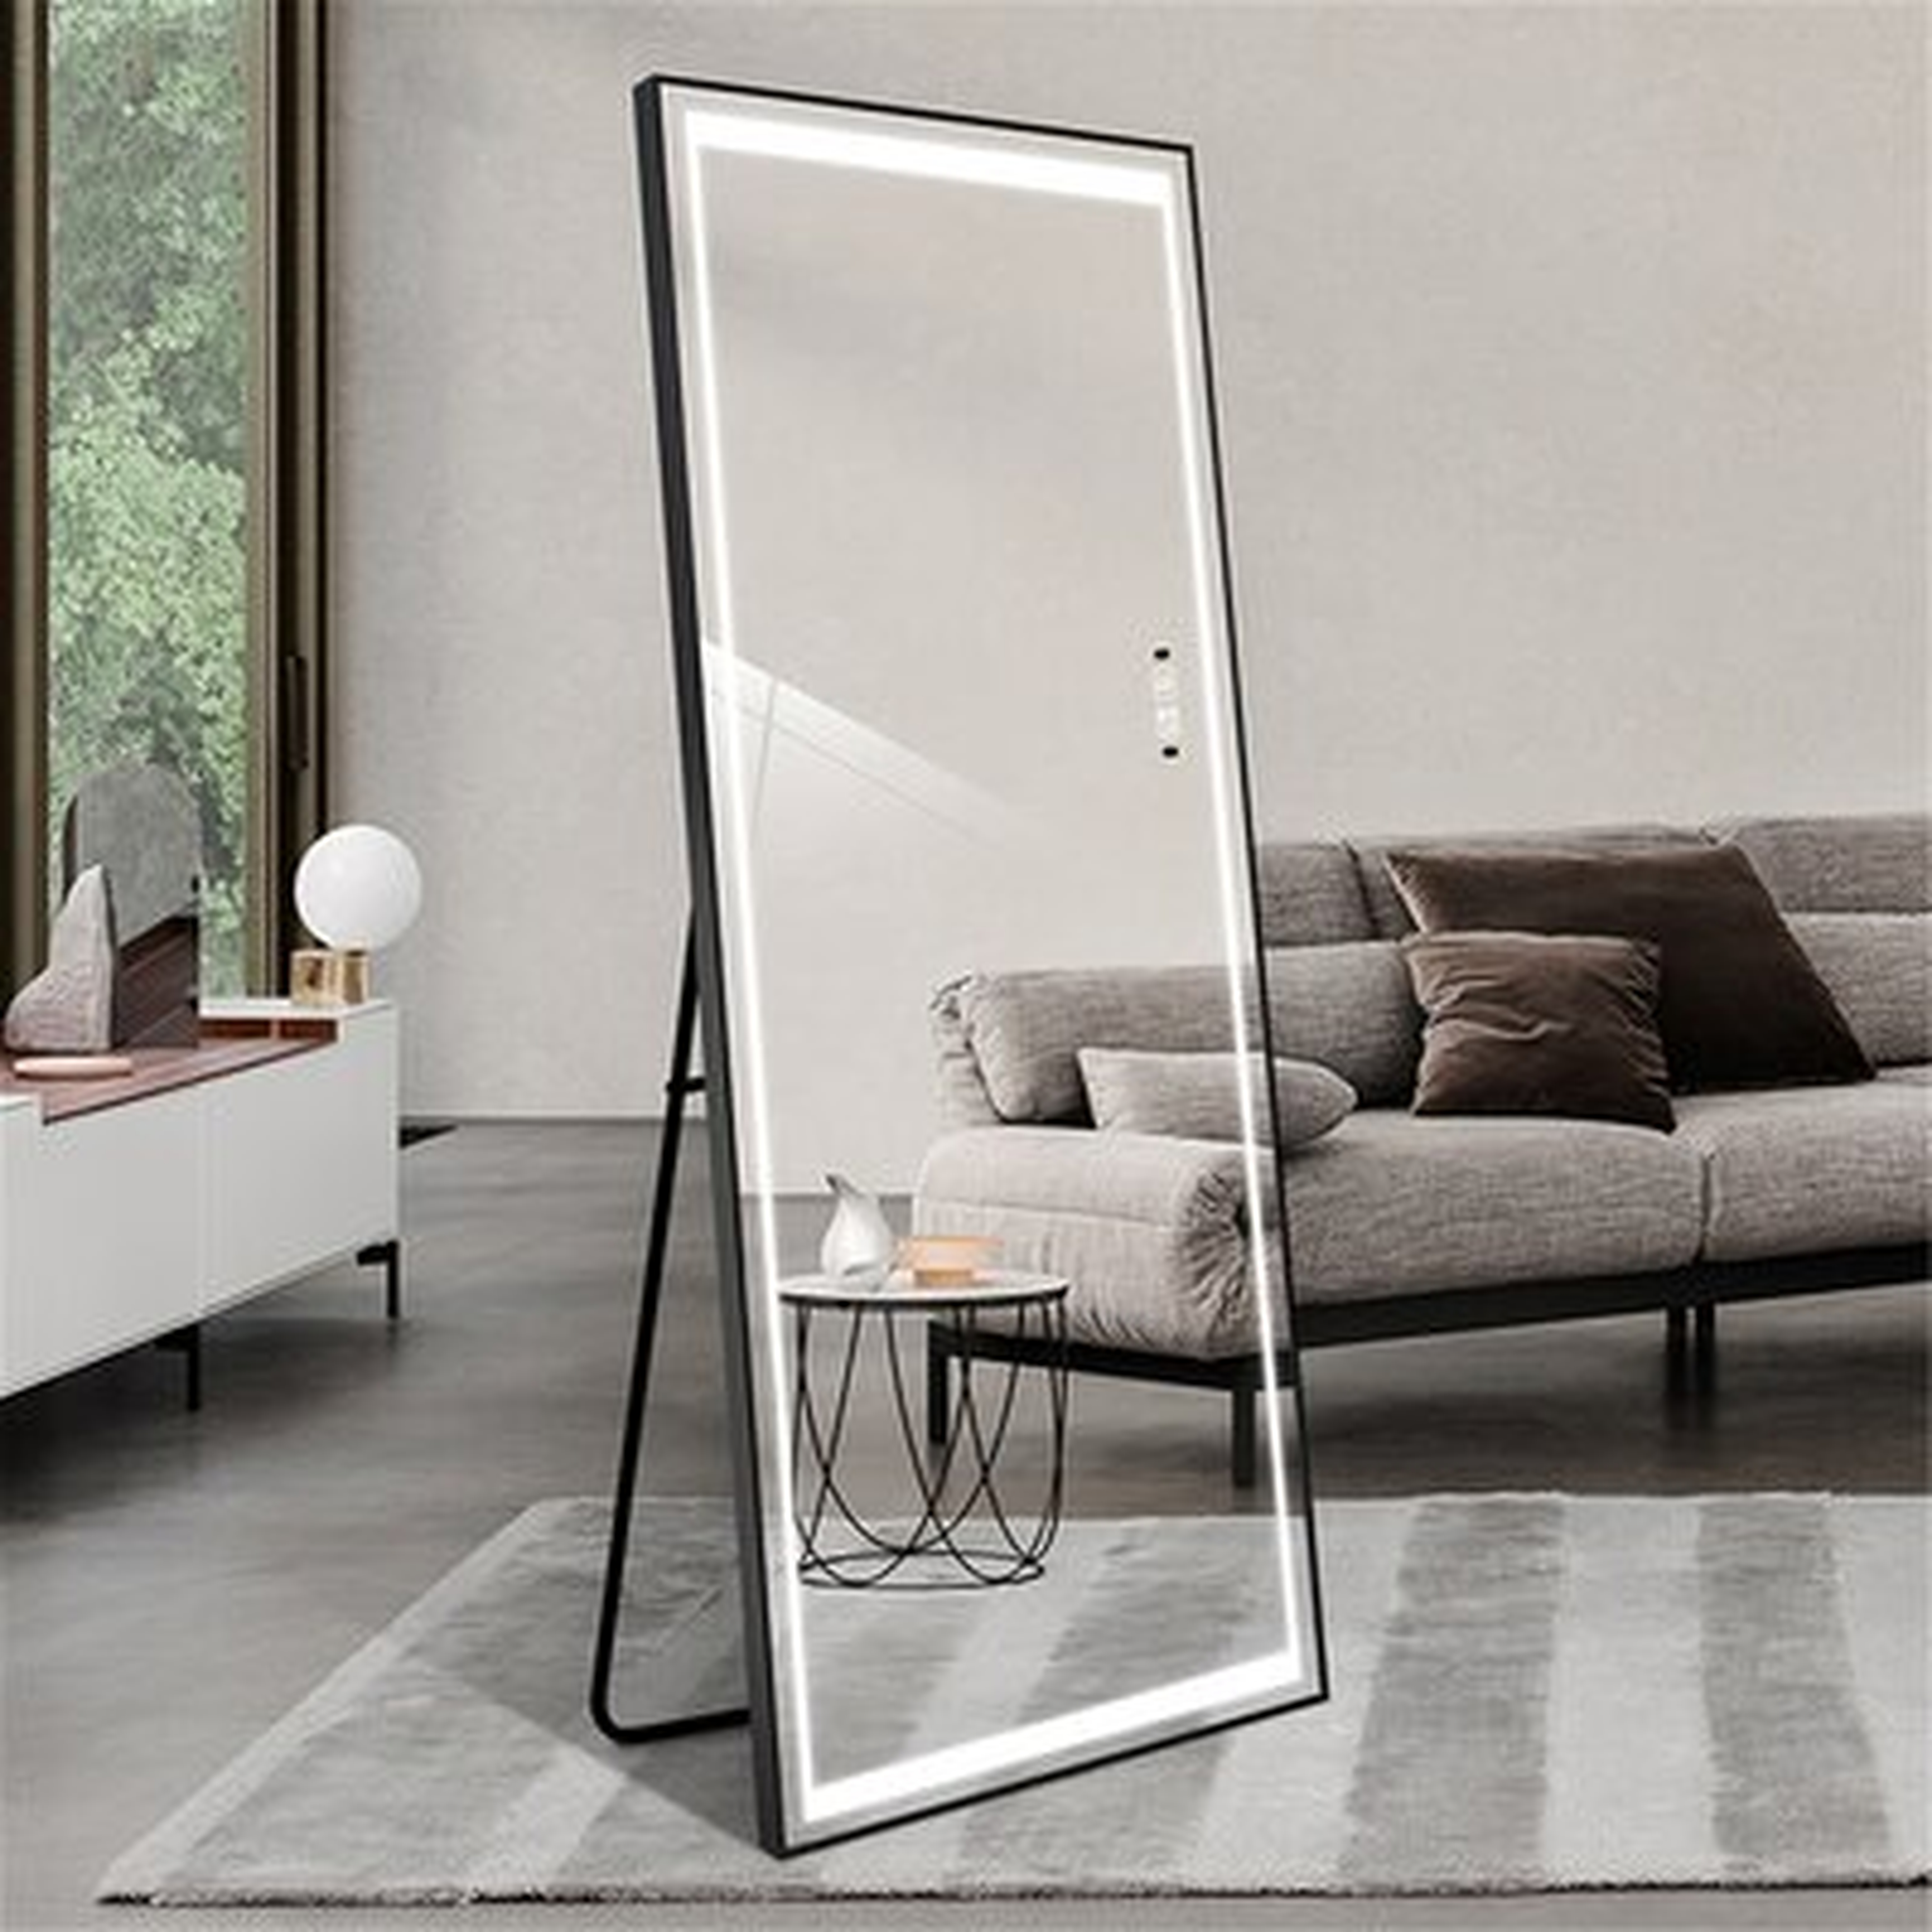 65" 24" Full Length Mirrors Intelligent Human Body Induction Mirror Led Aluminum Floor Mirrors Stand Full Body Dressing Bedroom,living Room,dressing Room Hotel Mirror Big Size Safe Touch Button - Wayfair